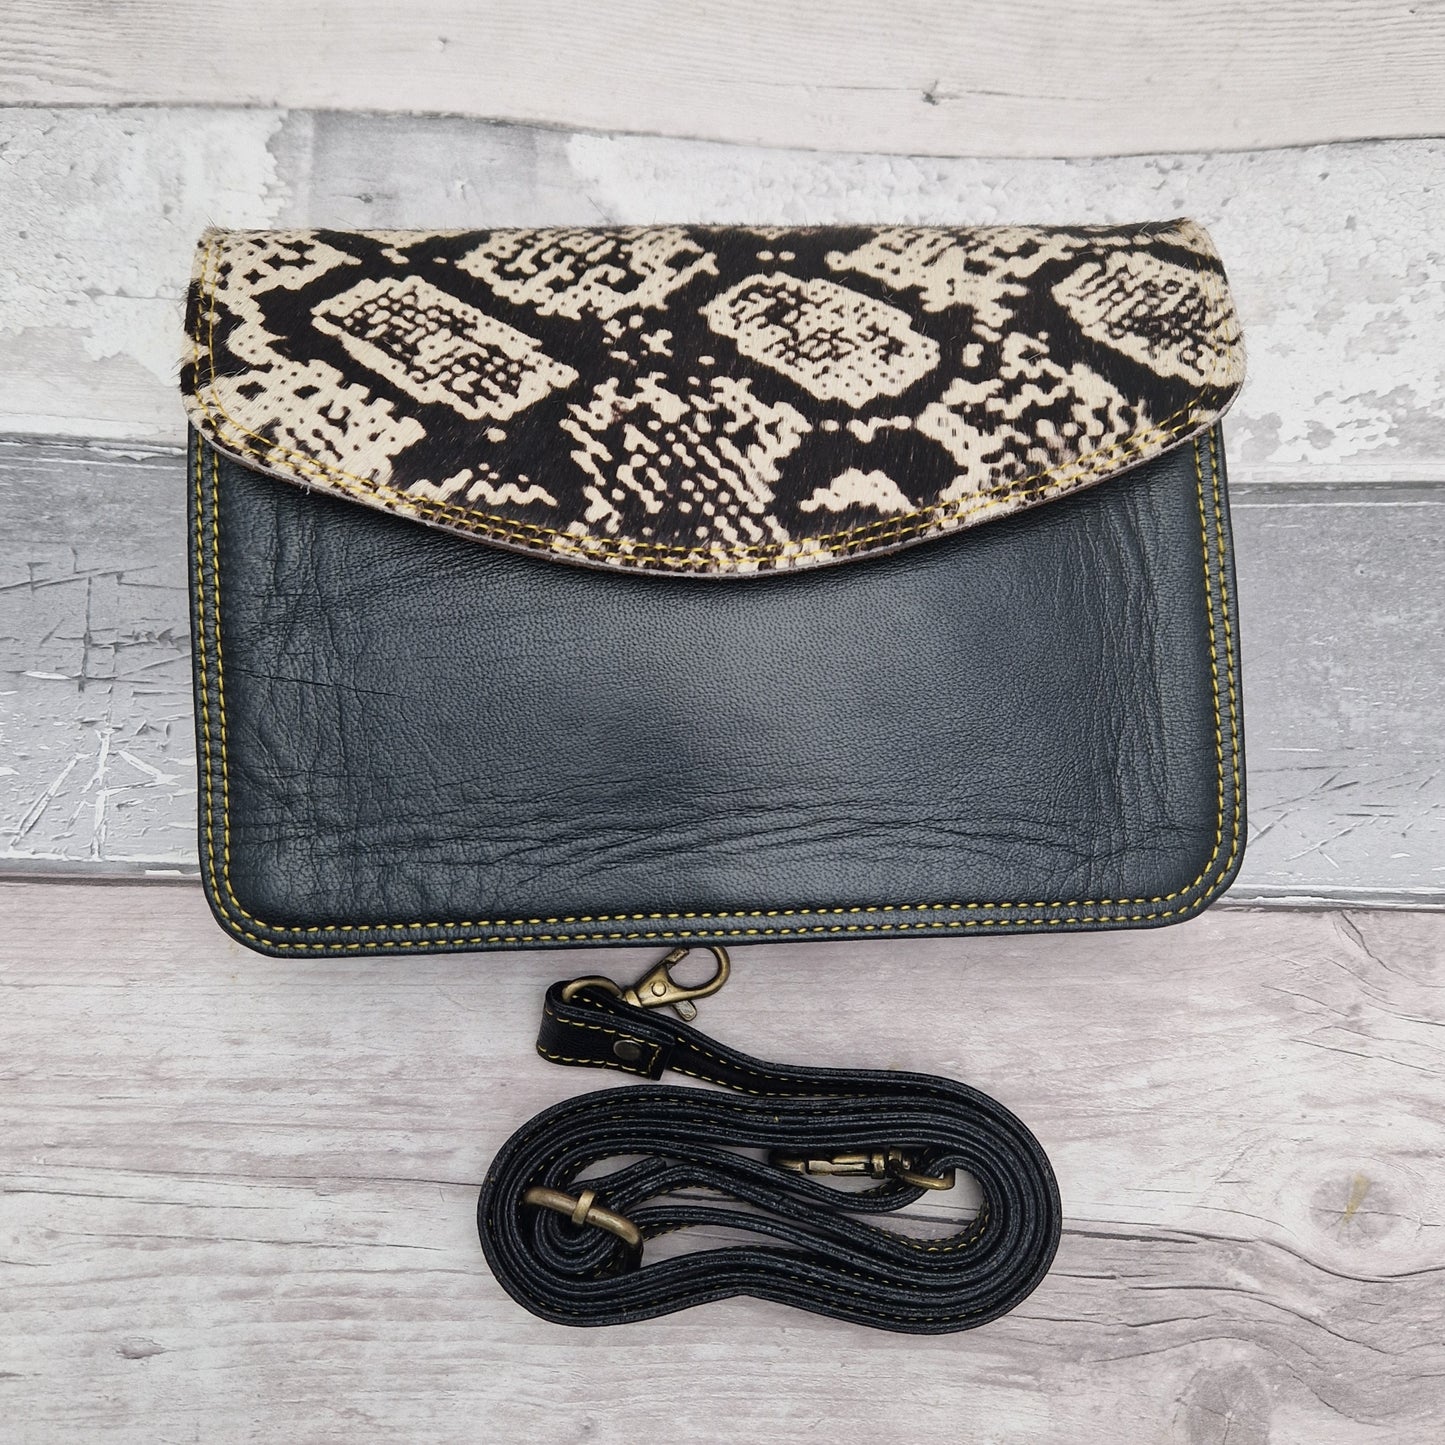 Black leather bag with envelope style and textured panel of snakeskin print.